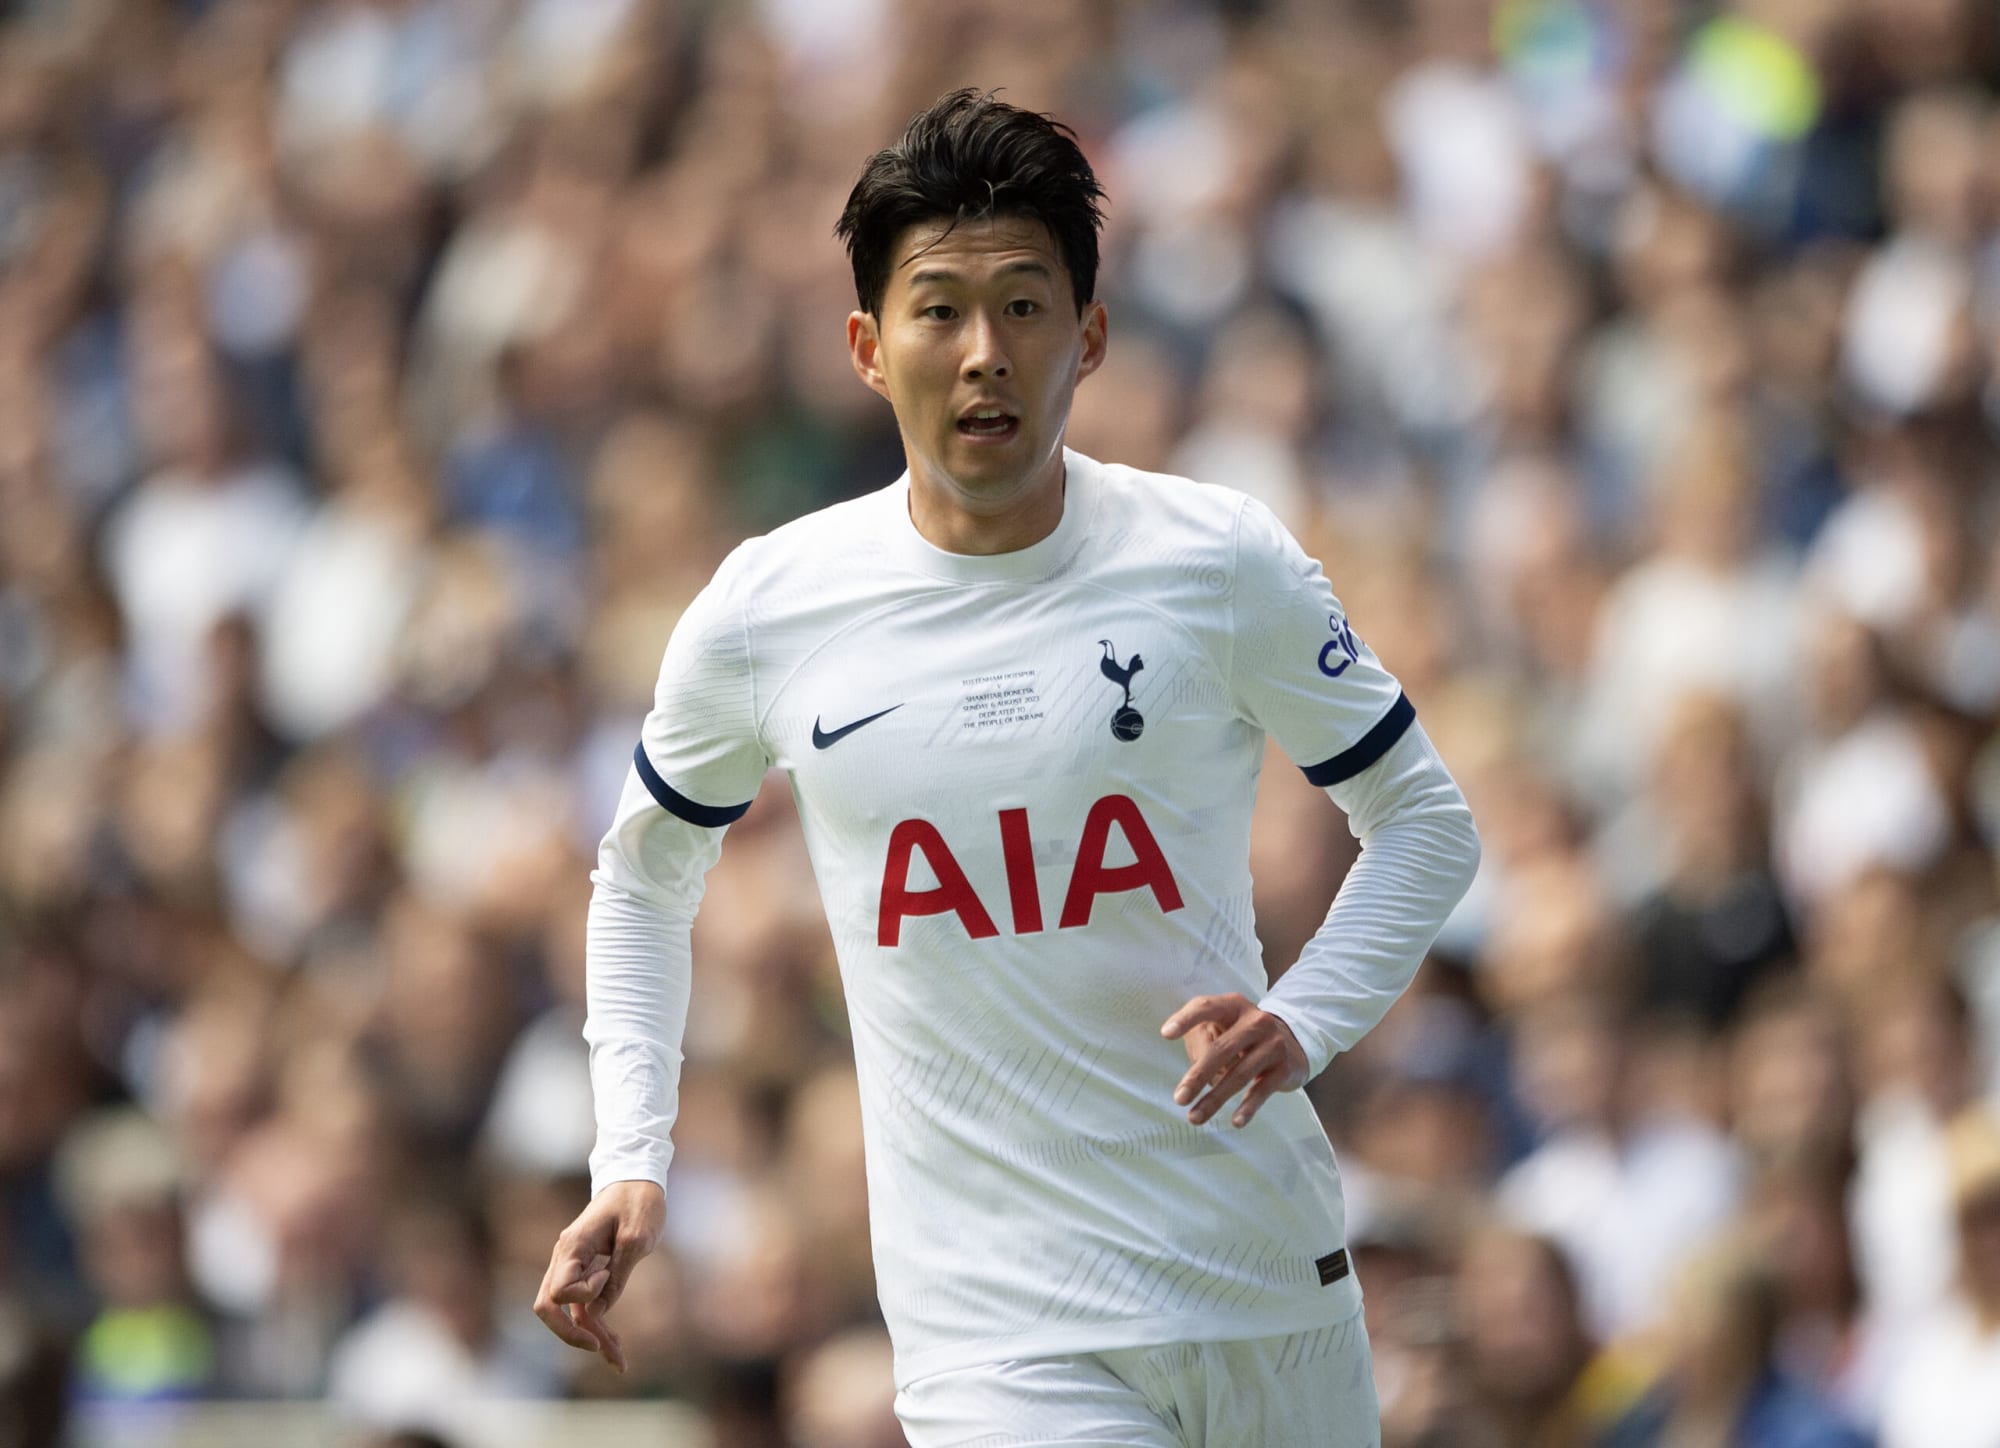 Son named Spurs captain: 'It's such a big honor